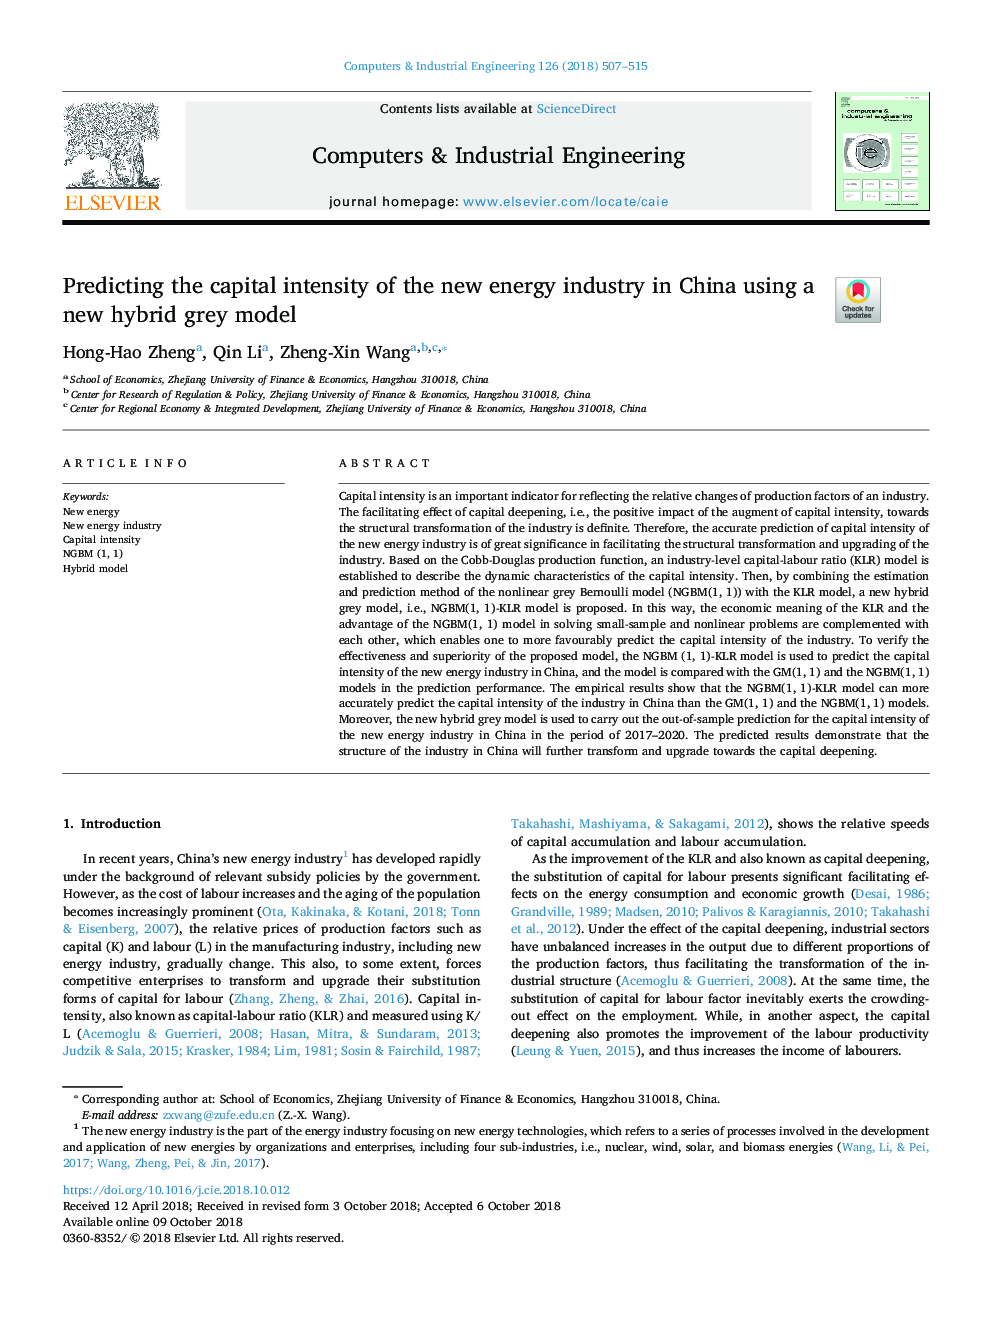 Predicting the capital intensity of the new energy industry in China using a new hybrid grey model